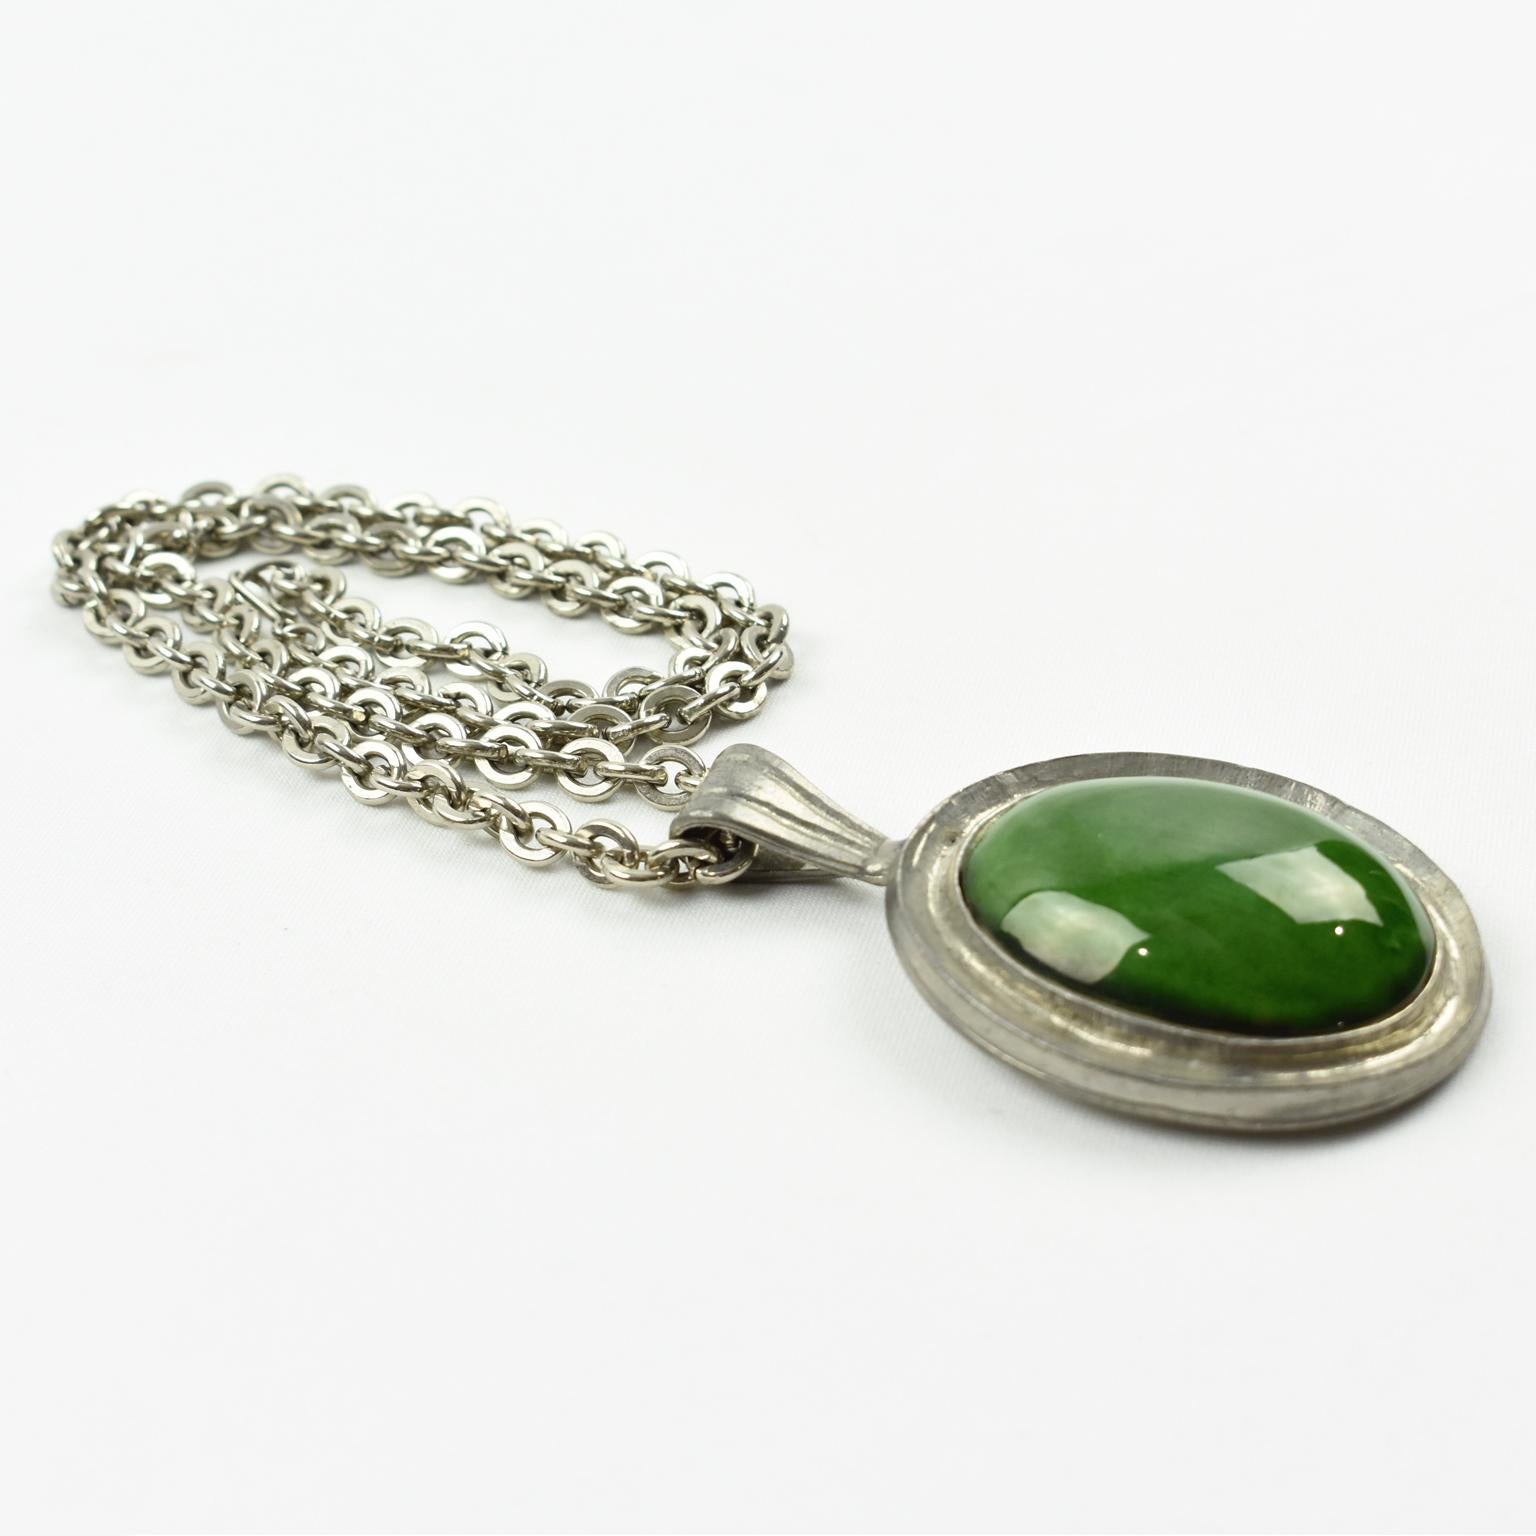 Space Age Pewter Necklace with Green Ceramic Pendant For Sale 1